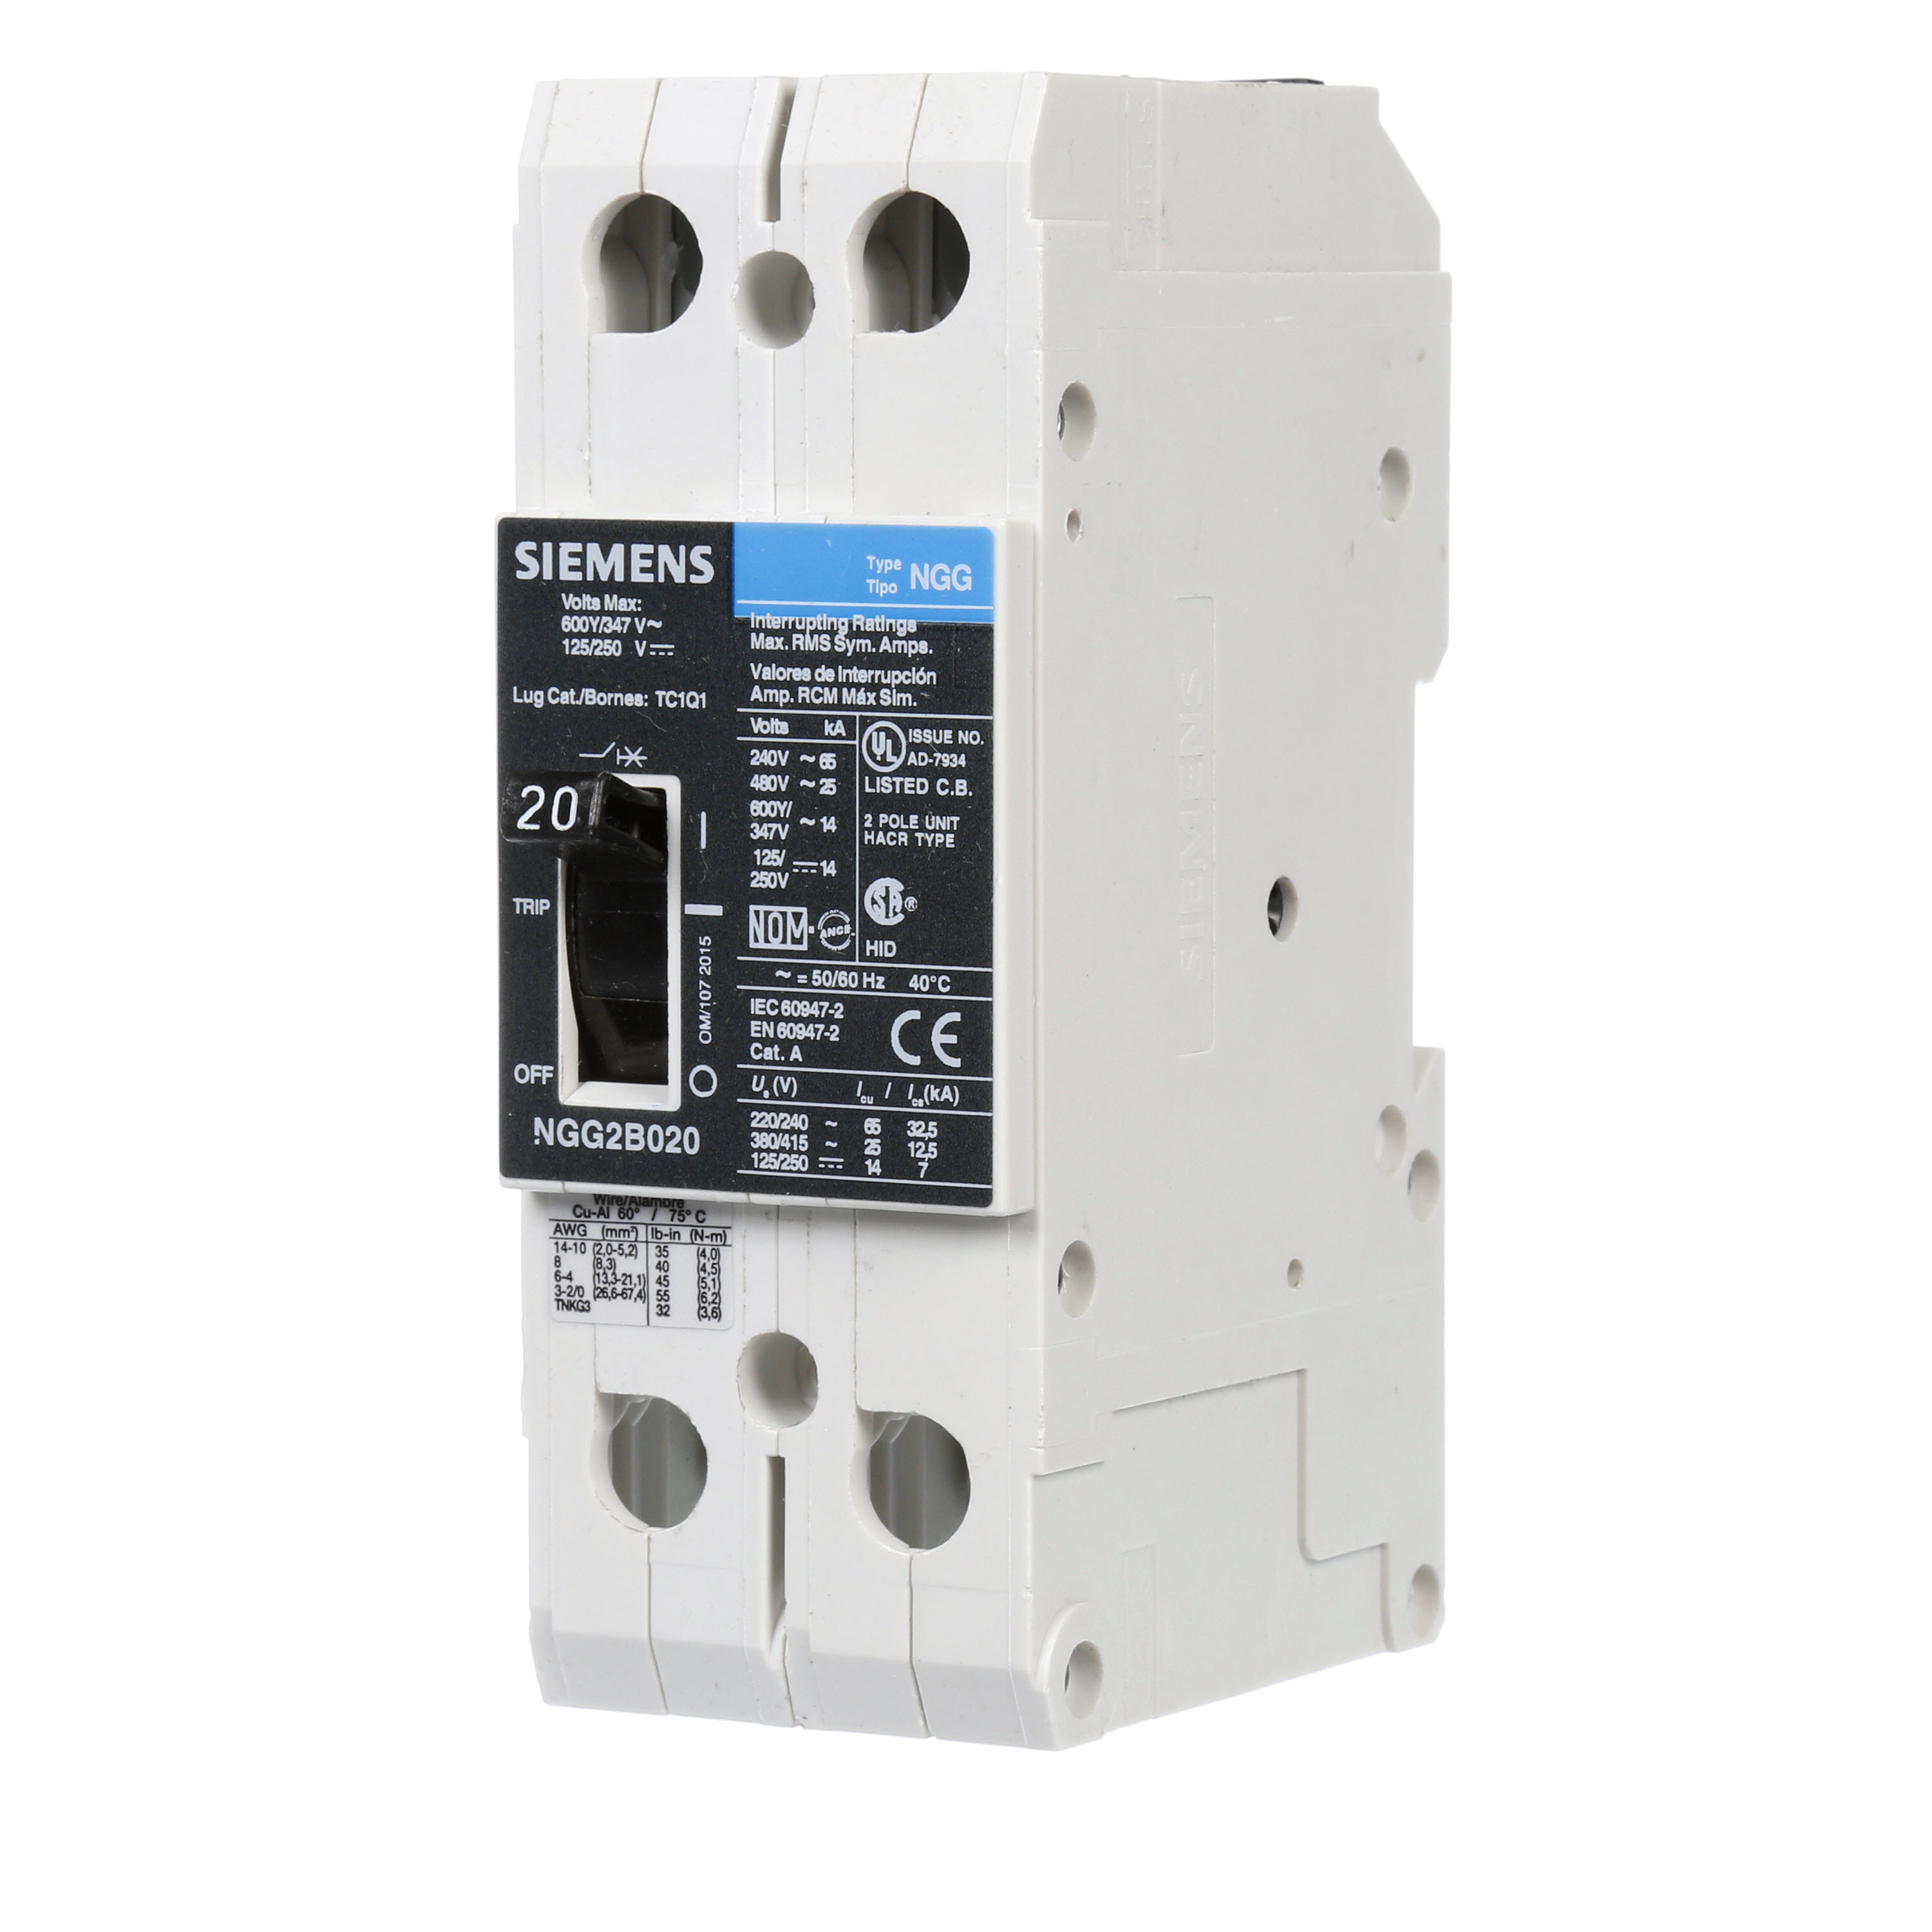 SIEMENS LOW VOLTAGE G FRAME CIRCUIT BREAKER WITH THERMAL - MAGNETIC TRIP. UL LISTED NGG FRAME WITH STANDARD BREAKING CAPACITY. 20A 2-POLE (14KAIC AT 600Y/347V)(25KAIC AT 480V). SPECIAL FEATURES MOUNTS ON DIN RAIL / SCREW, LINE AND LOAD SIDE LUGS (TC1Q1) WIRE RANGE 14 - 10 AWS (CU/AL). DIMENSIONS (W x H x D) IN 2 x 5.4 x 2.8.